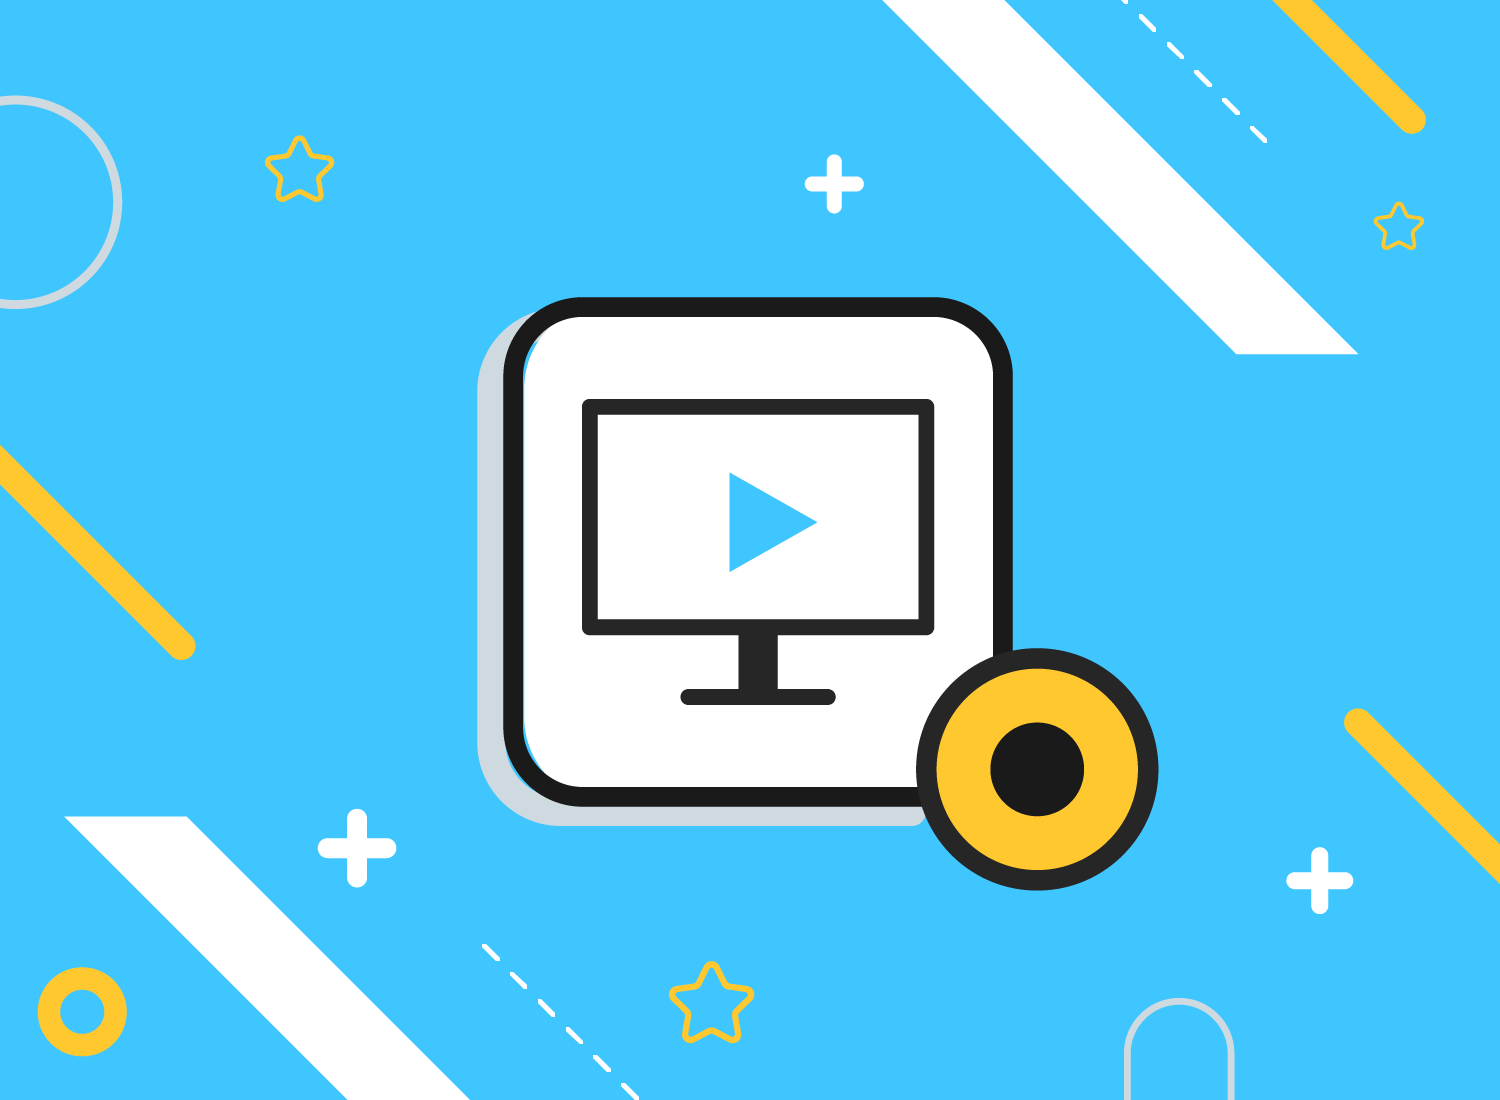 A screencast is a digital video recording of your computer screen that typically includes some sort of audio voice over.